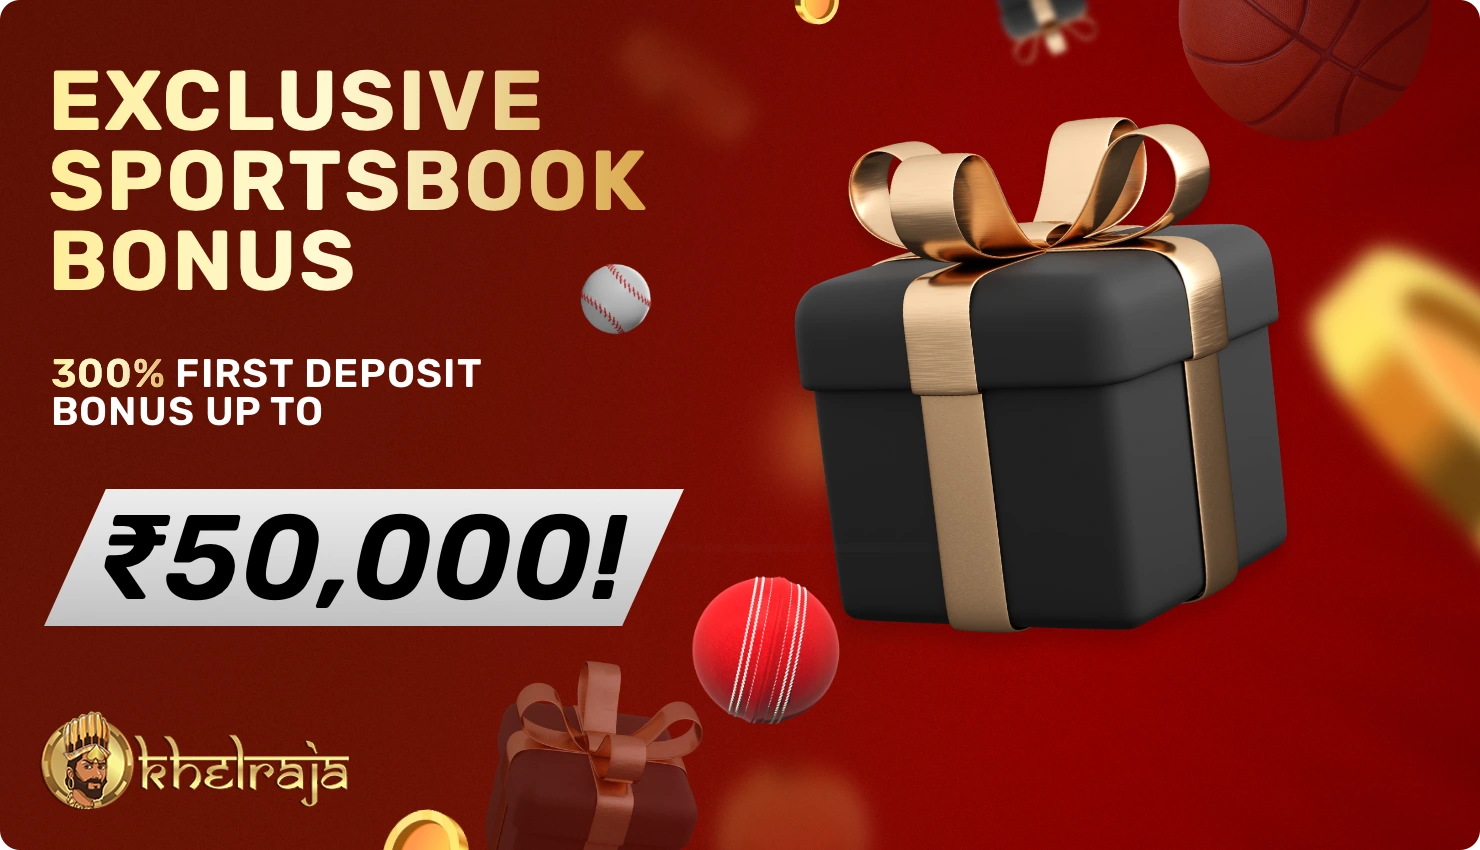 For users who love to bet on sports at Khelraja, an eclusive sportsbook bonus is available